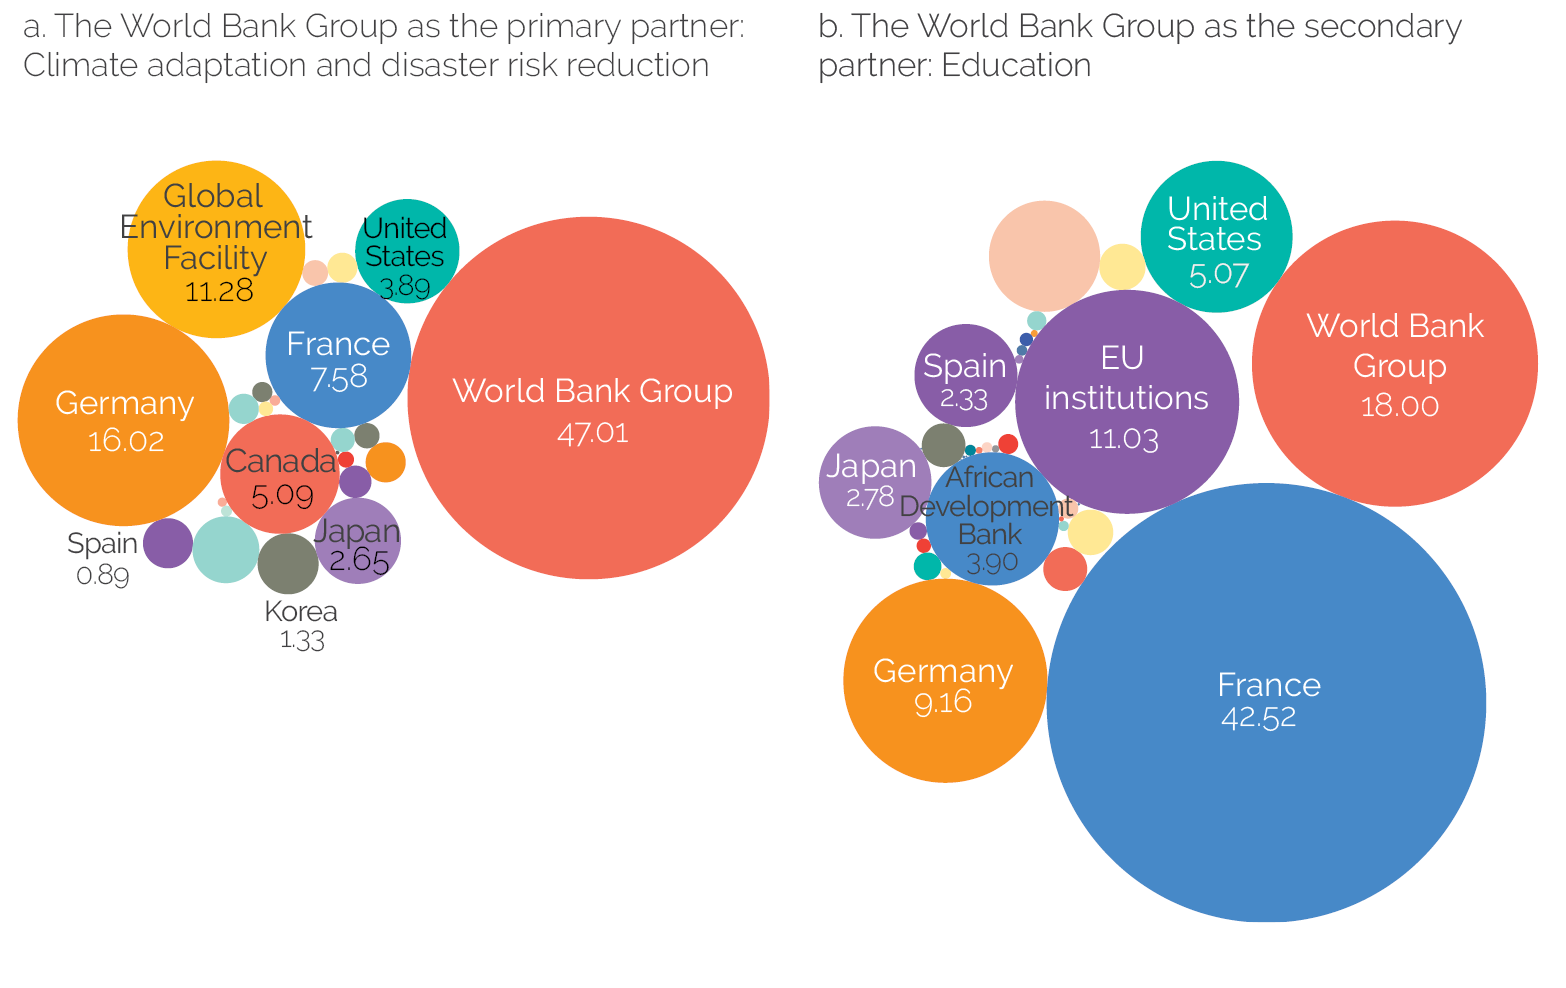 Panel a.
Bubble chart showing that the Bank Group is Morocco’s primary partner for Climate adaptation and Disaster Risk Reduction.
Panel b.
Bubble chart showing that the Bank Group is a secondary partner for Education, behind bilateral support from France.
